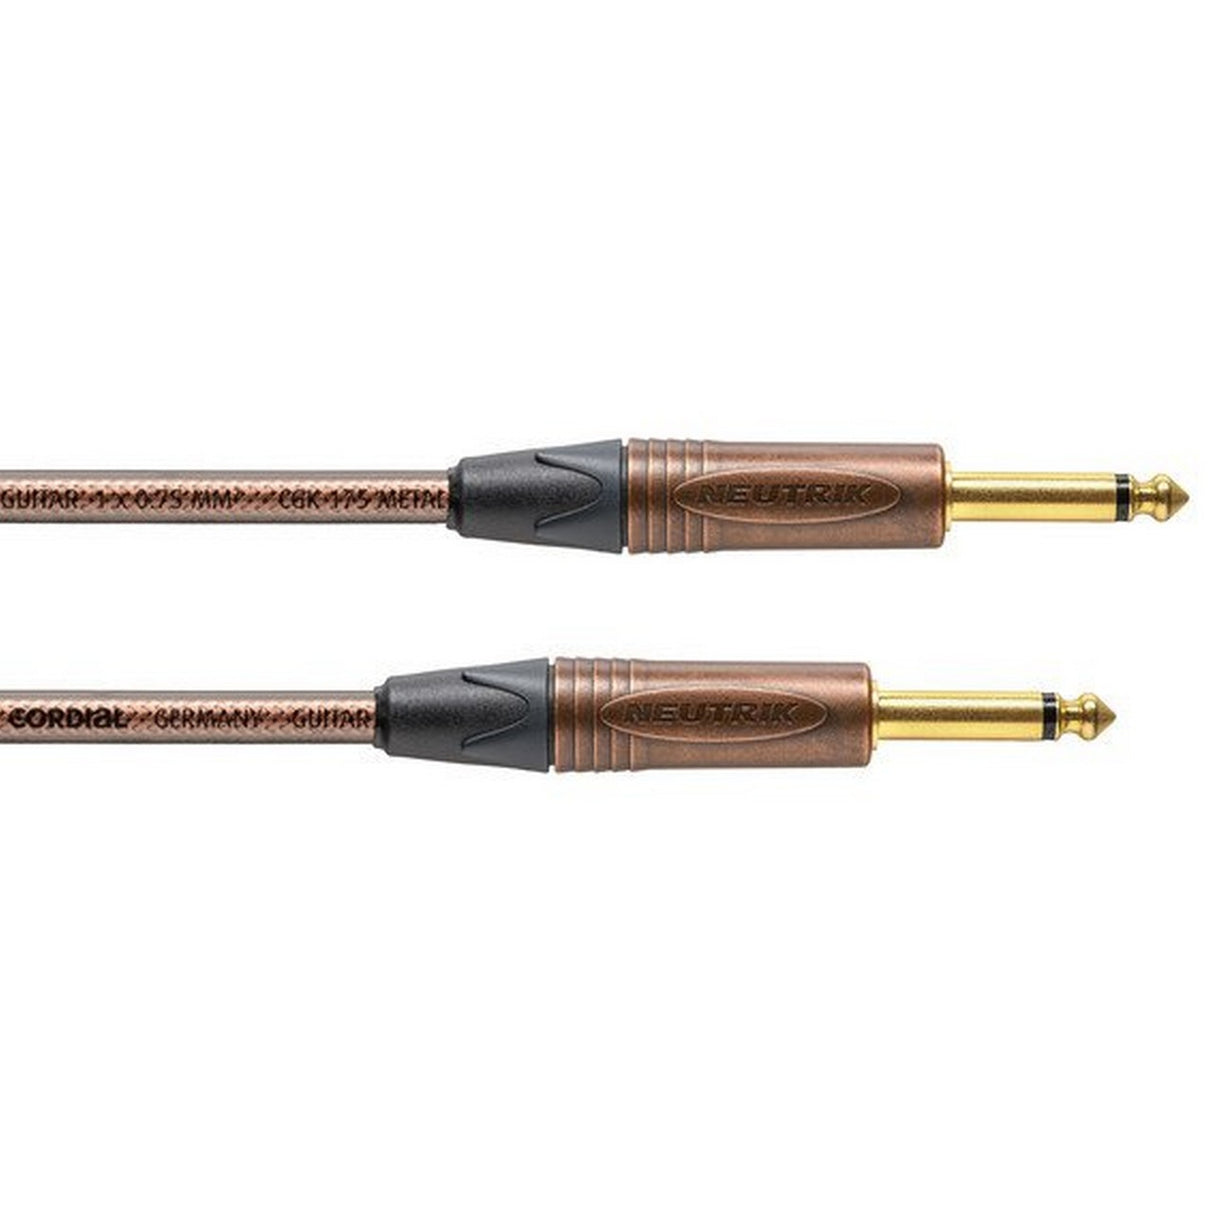 Cordial CSI 3 PP-METAL Neutrik 3-Meter Straight 1/4-Inch to Straight 1/4-Inch Guitar Cable, Copper